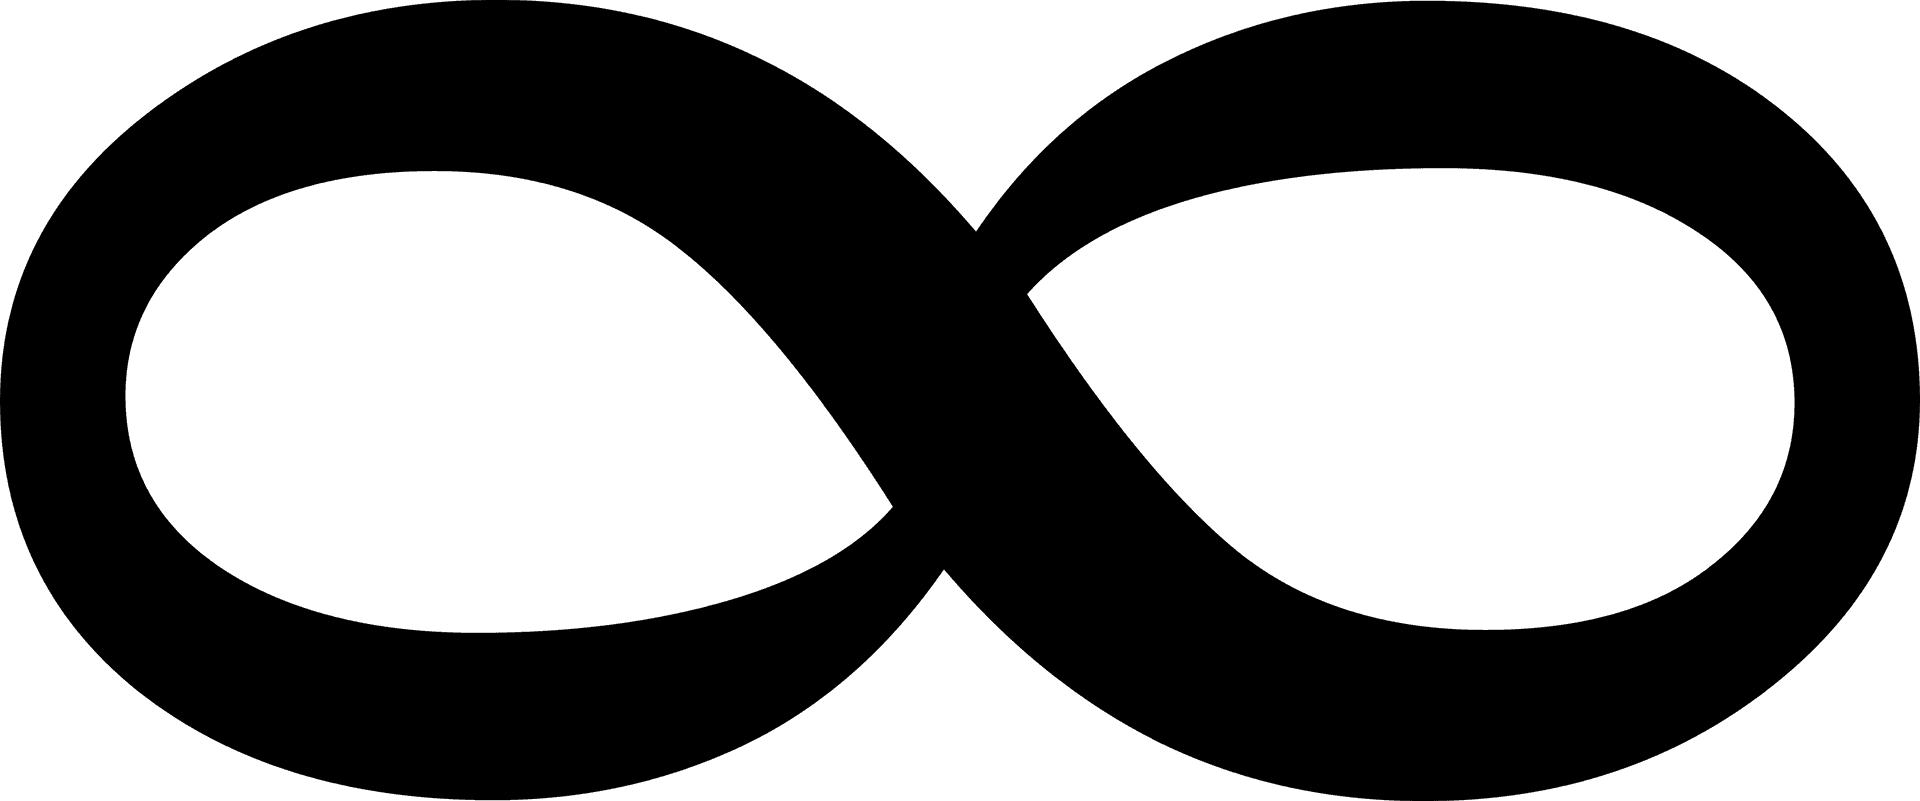 Infinity Symbol Black Silhouette PNG image